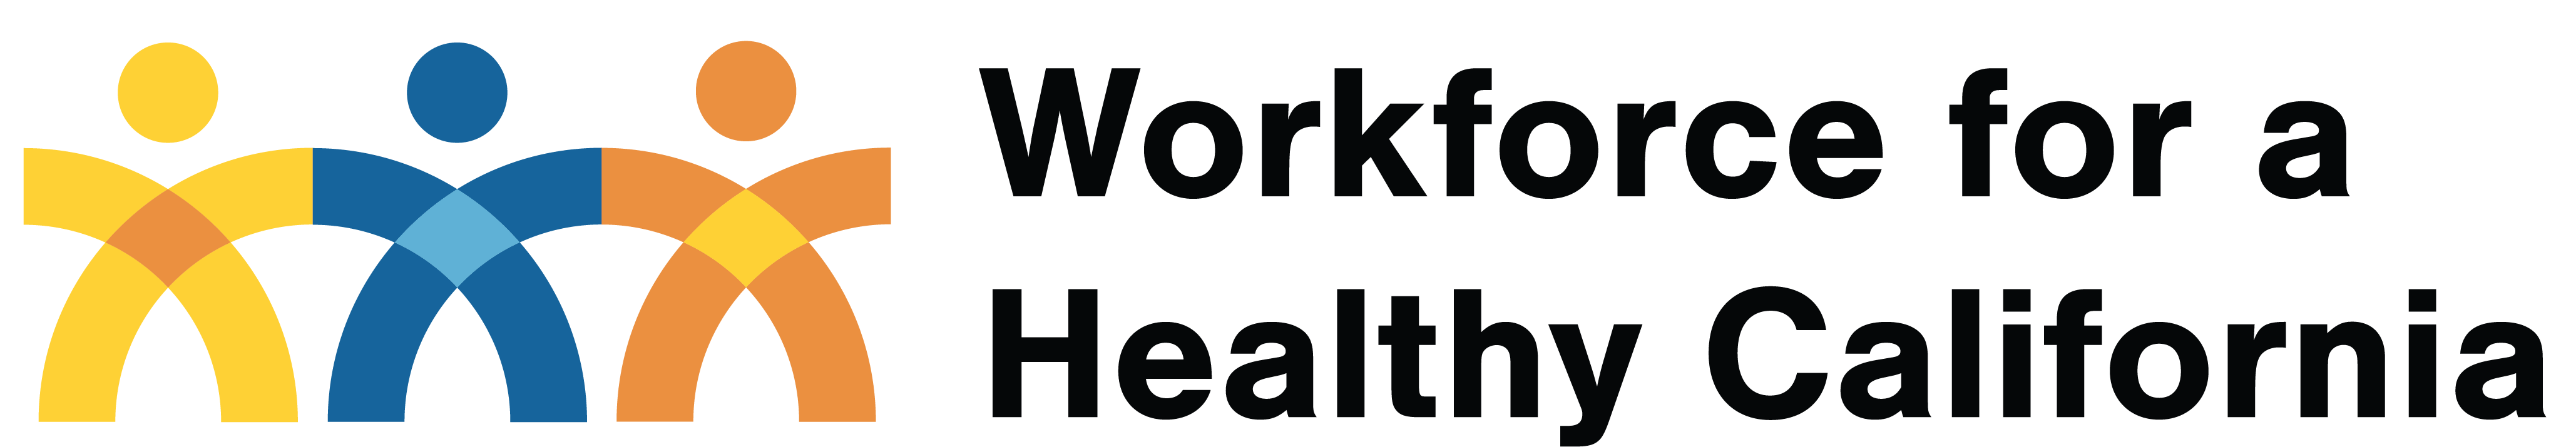 Workforce for a Healthy California